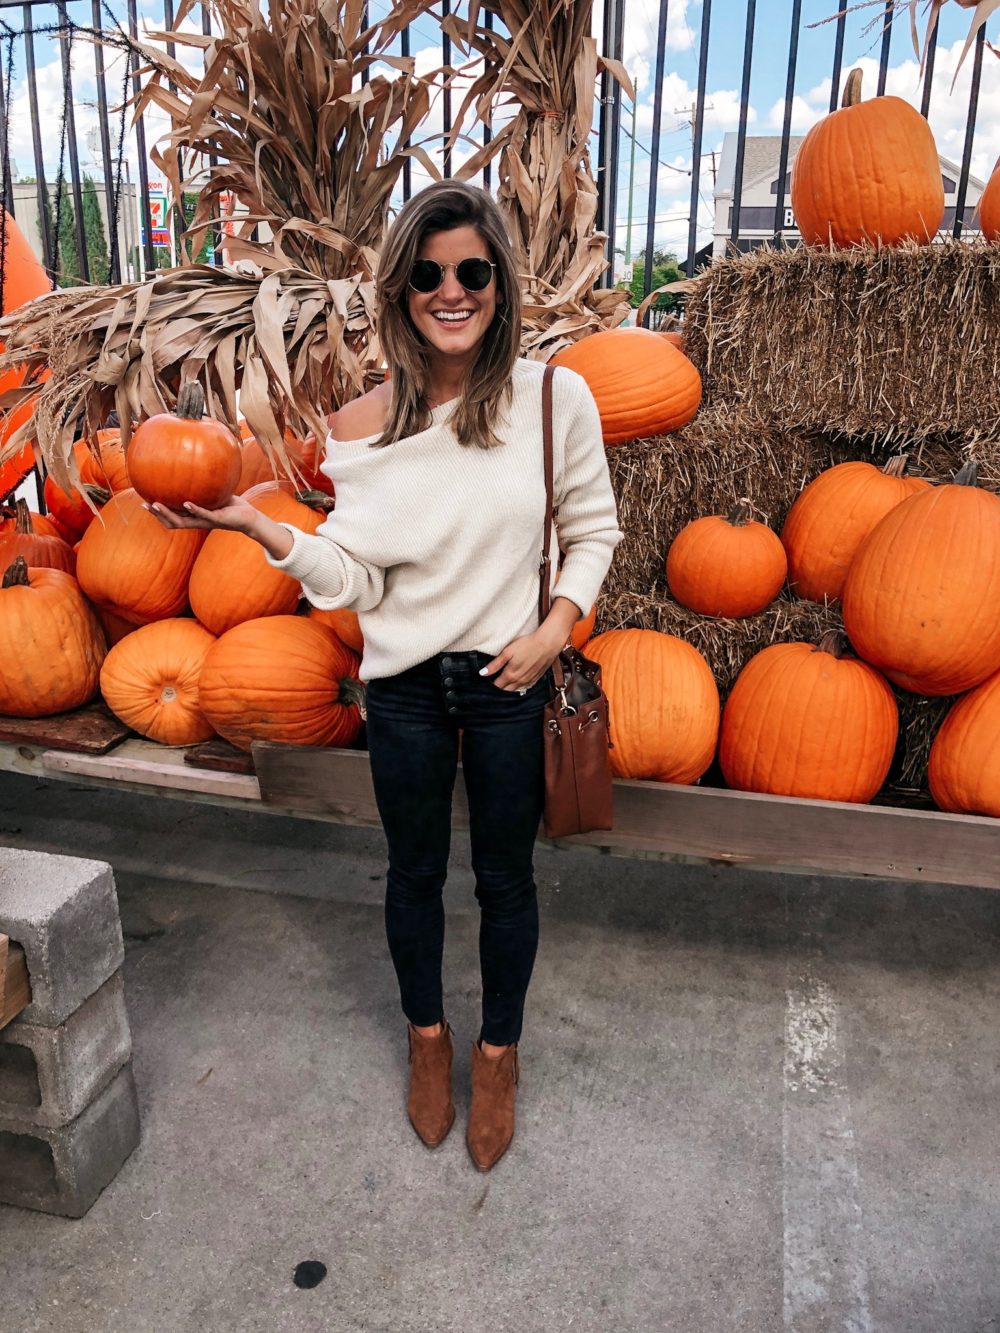 brighton keller at pumpkin patch wearing cream sweater black jeans and tan booties with bucket bag and sunglasses